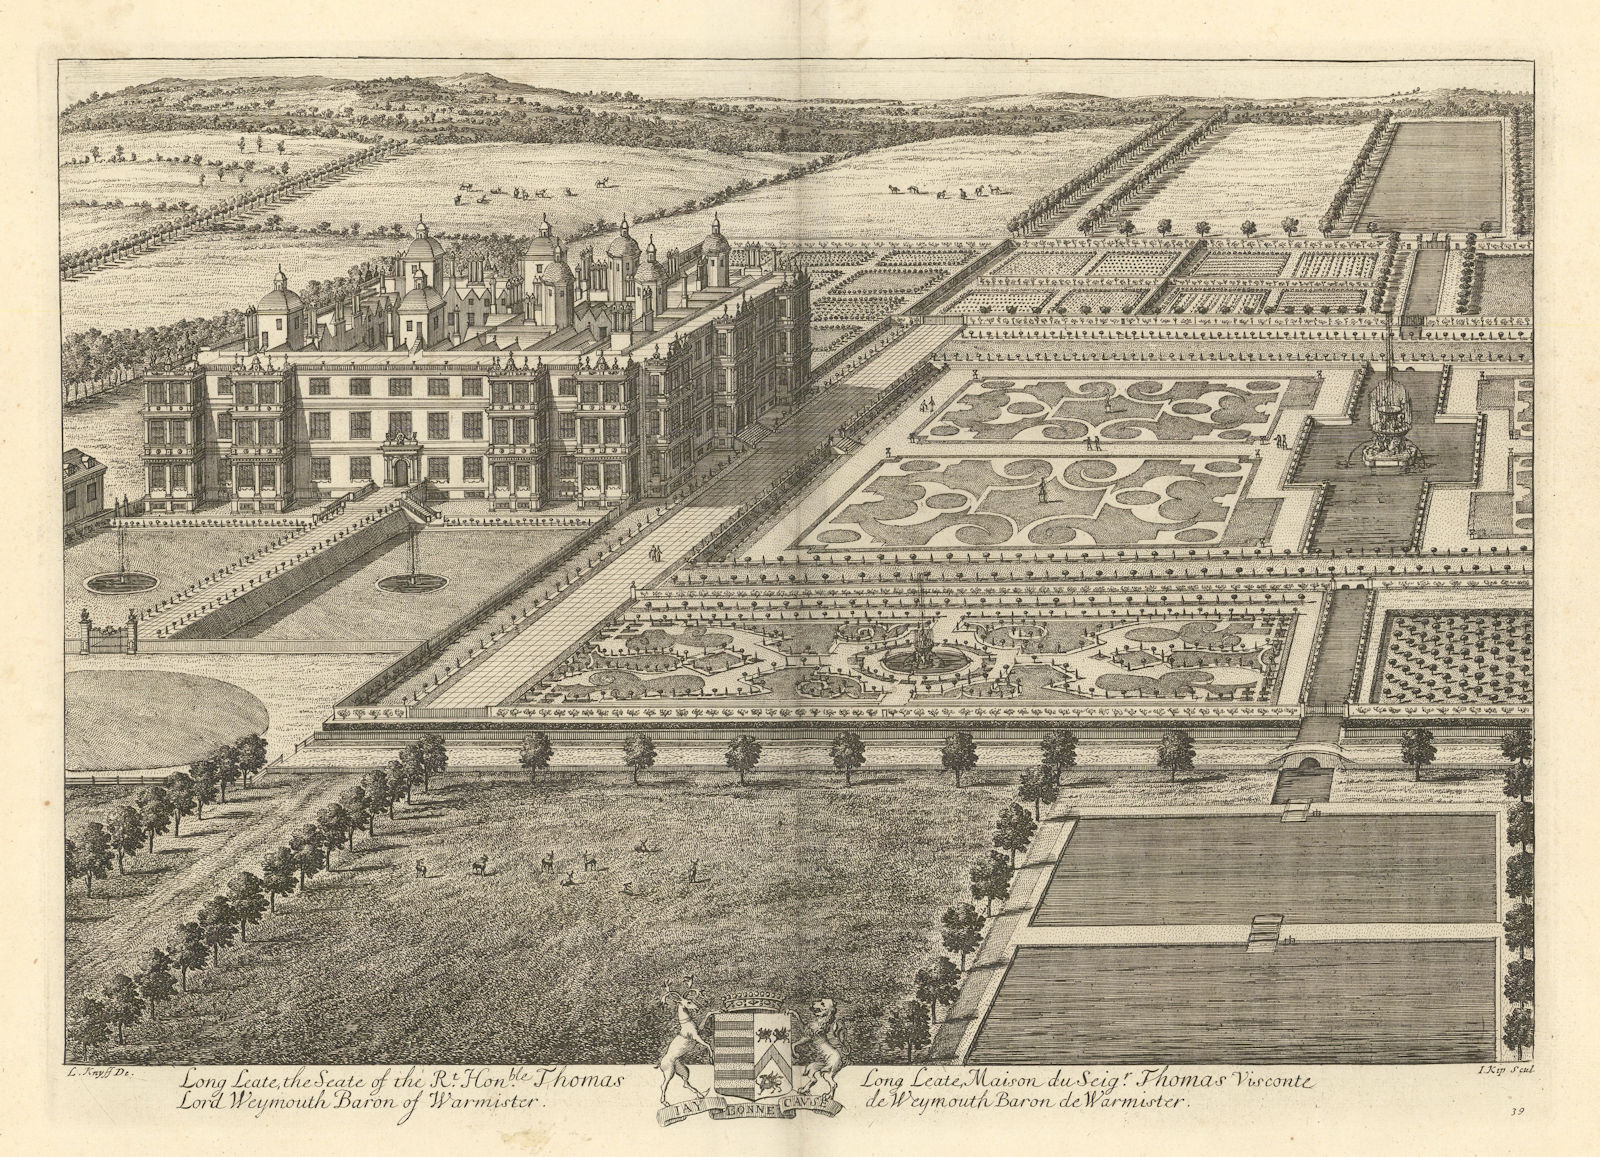 Associate Product Longleat House, Wiltshire by Kip & Knyff. "Long Leate, the Seate…"  1709 print